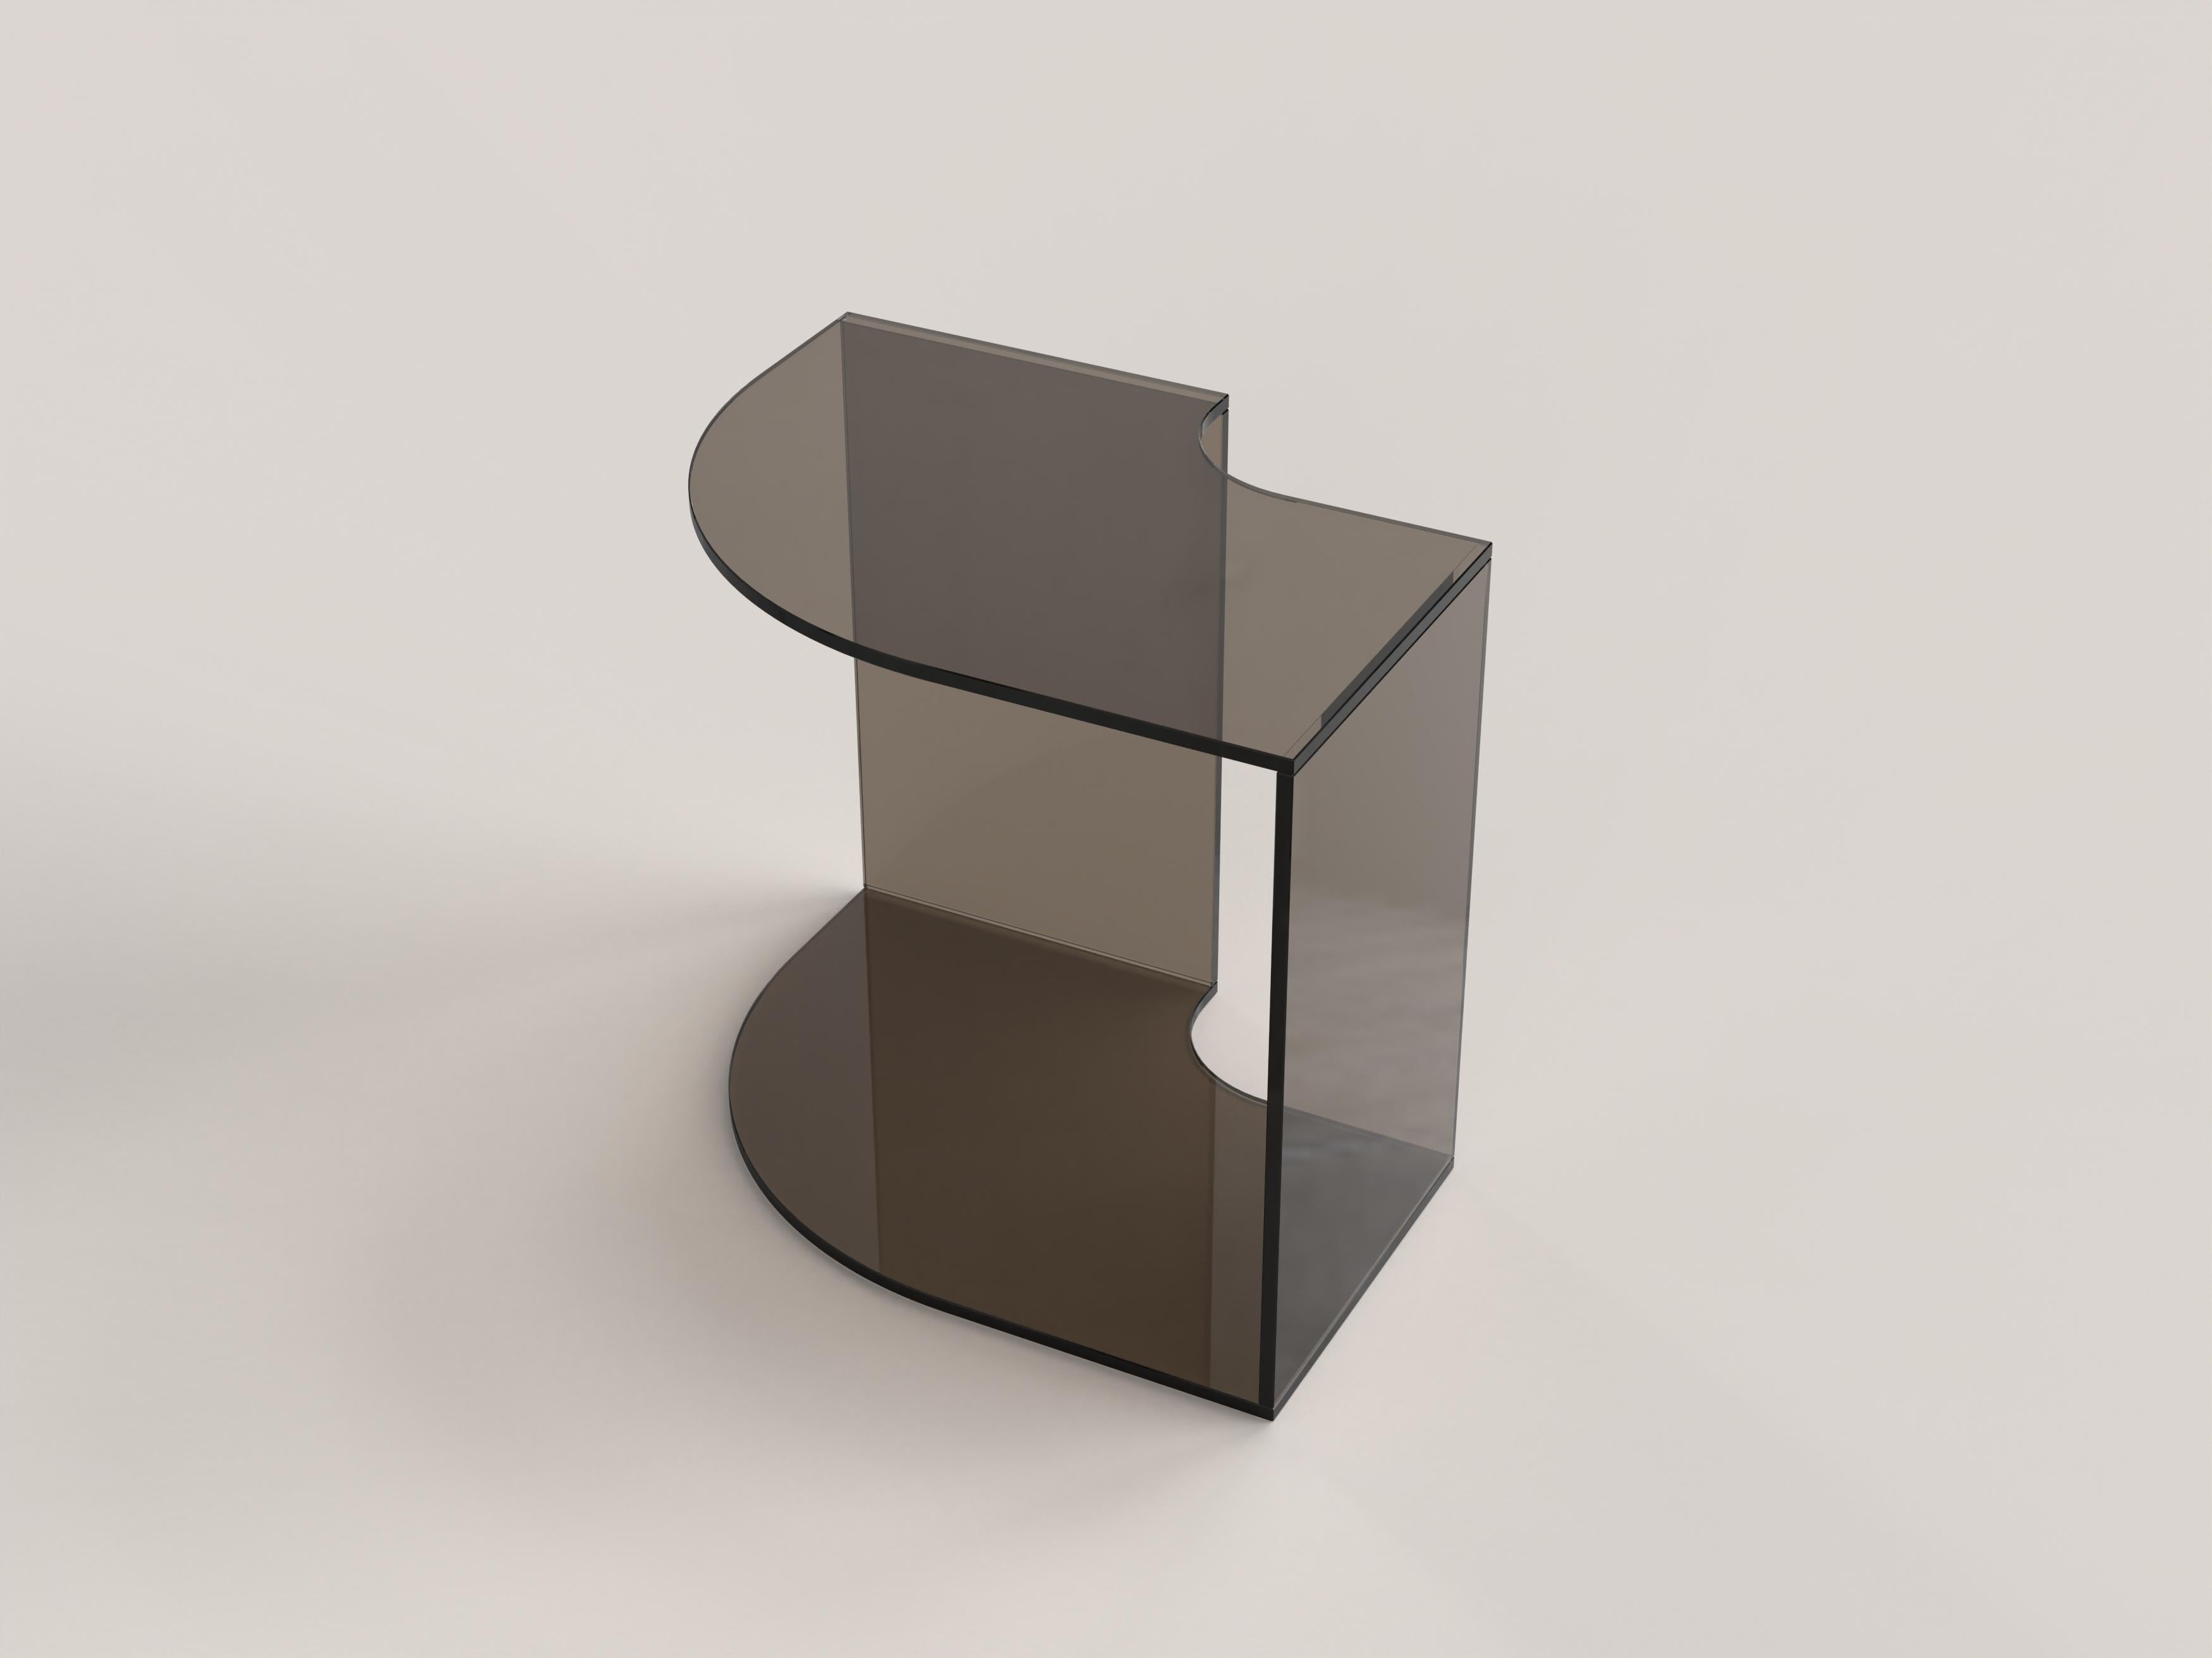 Quarter V1 is a 21st Century side table made by Italian artisans in bronzed glass. The piece is manufactured in a limited edition of 1000 signed and progressively numbered examples. It is part of the collectible design language Quarter that has been